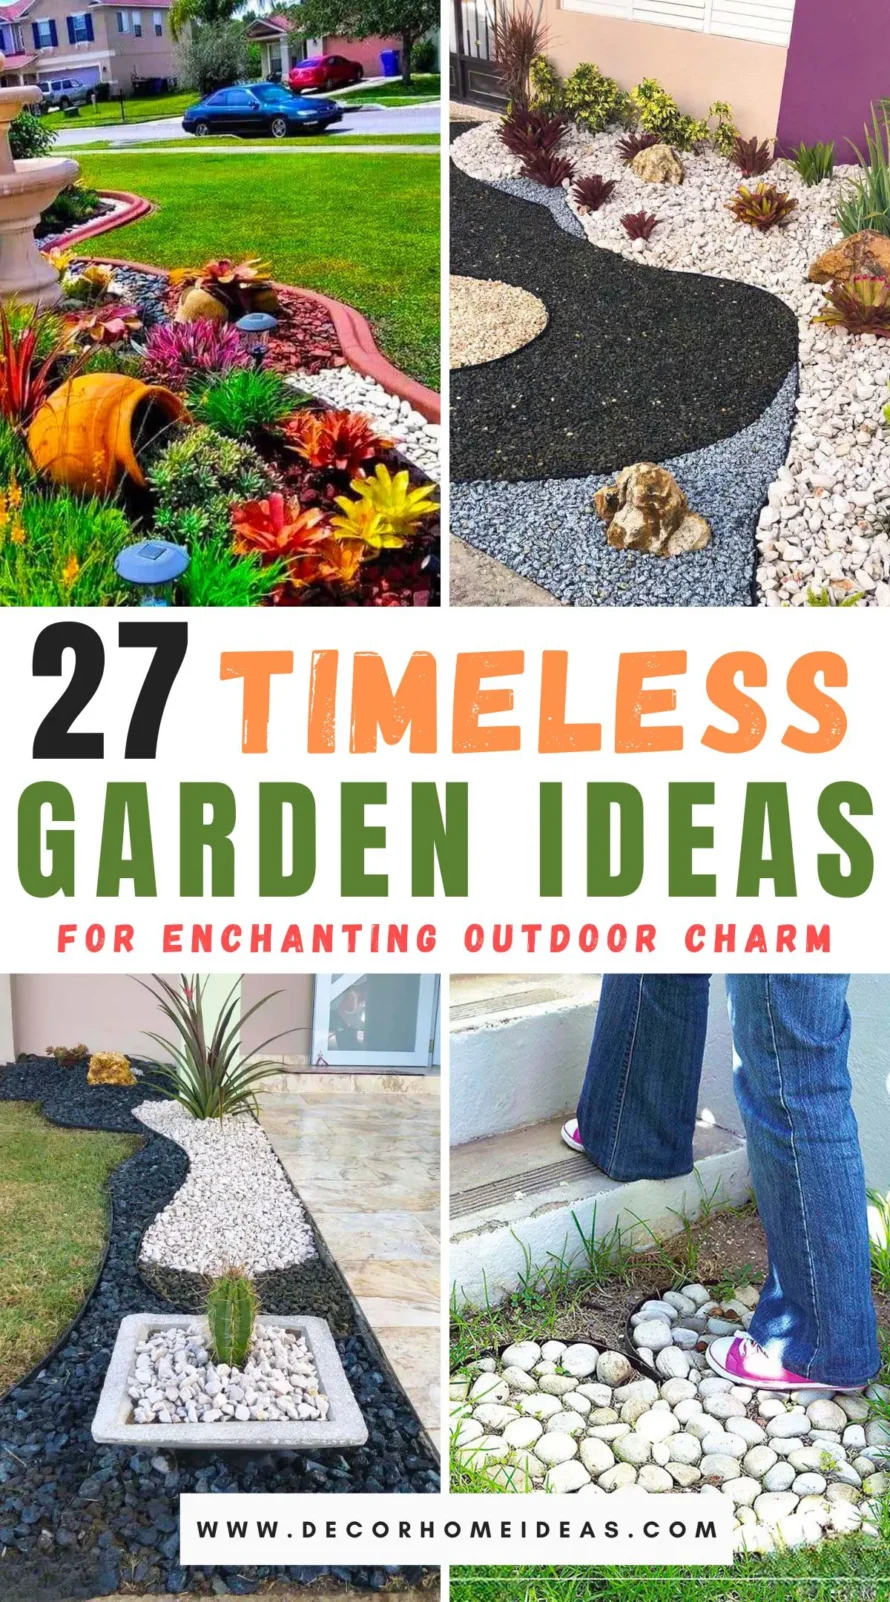 Discover 27 timeless garden designs that promise to add enchanting charm to any outdoor space. From quaint English gardens to serene Zen retreats, find inspiration to transform your backyard into a magical haven.